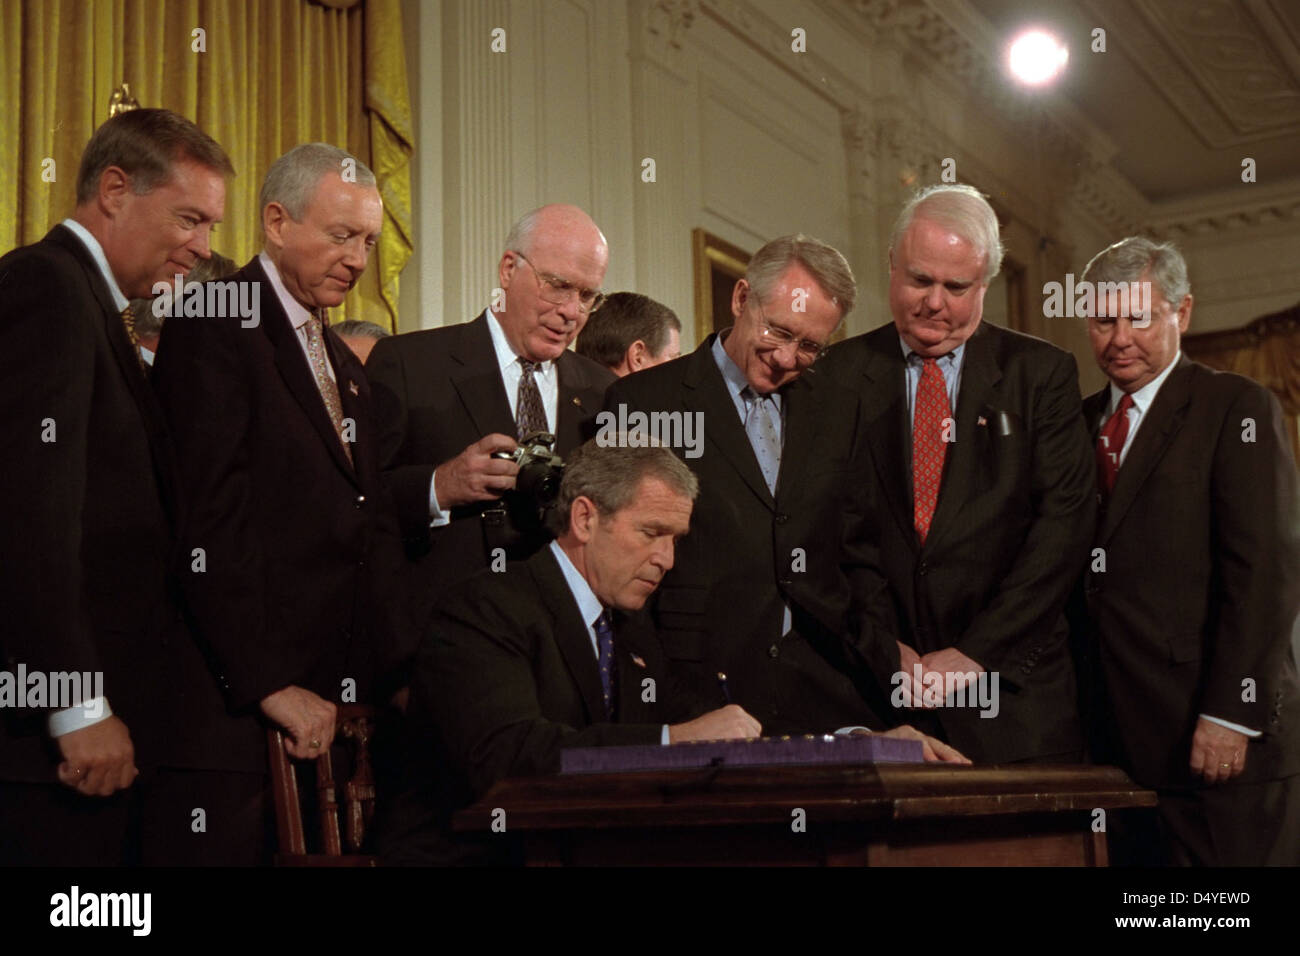 President George W. Bush signs the USA Patriot Act Friday, Oct. 26, 2001, in the East Room of the White House. Standing behind the President from left are: U.S. Attorney General John Ashcroft; Sen. Orrin Hatch, R-Utah; Sen. Patrick Leahy, D-Vt; Sen. Harry Reid, D-Nev; Rep. James Sensenbrenner of Wisconsin, and Sen. Bob Graham, D-Fla. Photo by Eric Draper, Courtesy of the George W. Bush Presidential Library Stock Photo